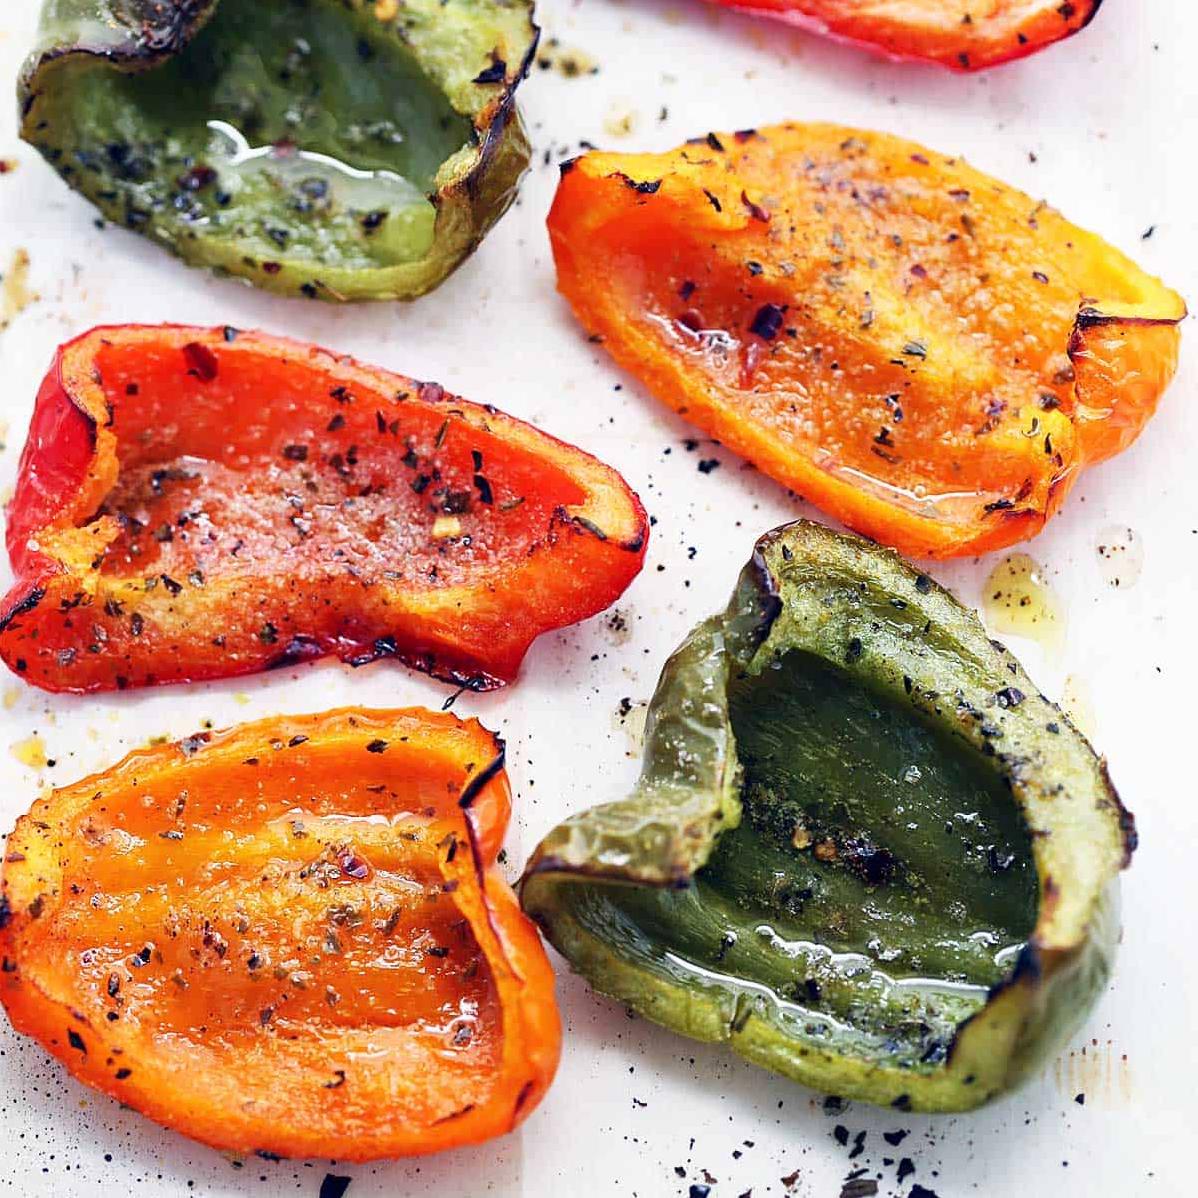  Crisp, fresh, and utterly delicious: These baked capsicum will become an instant favorite.